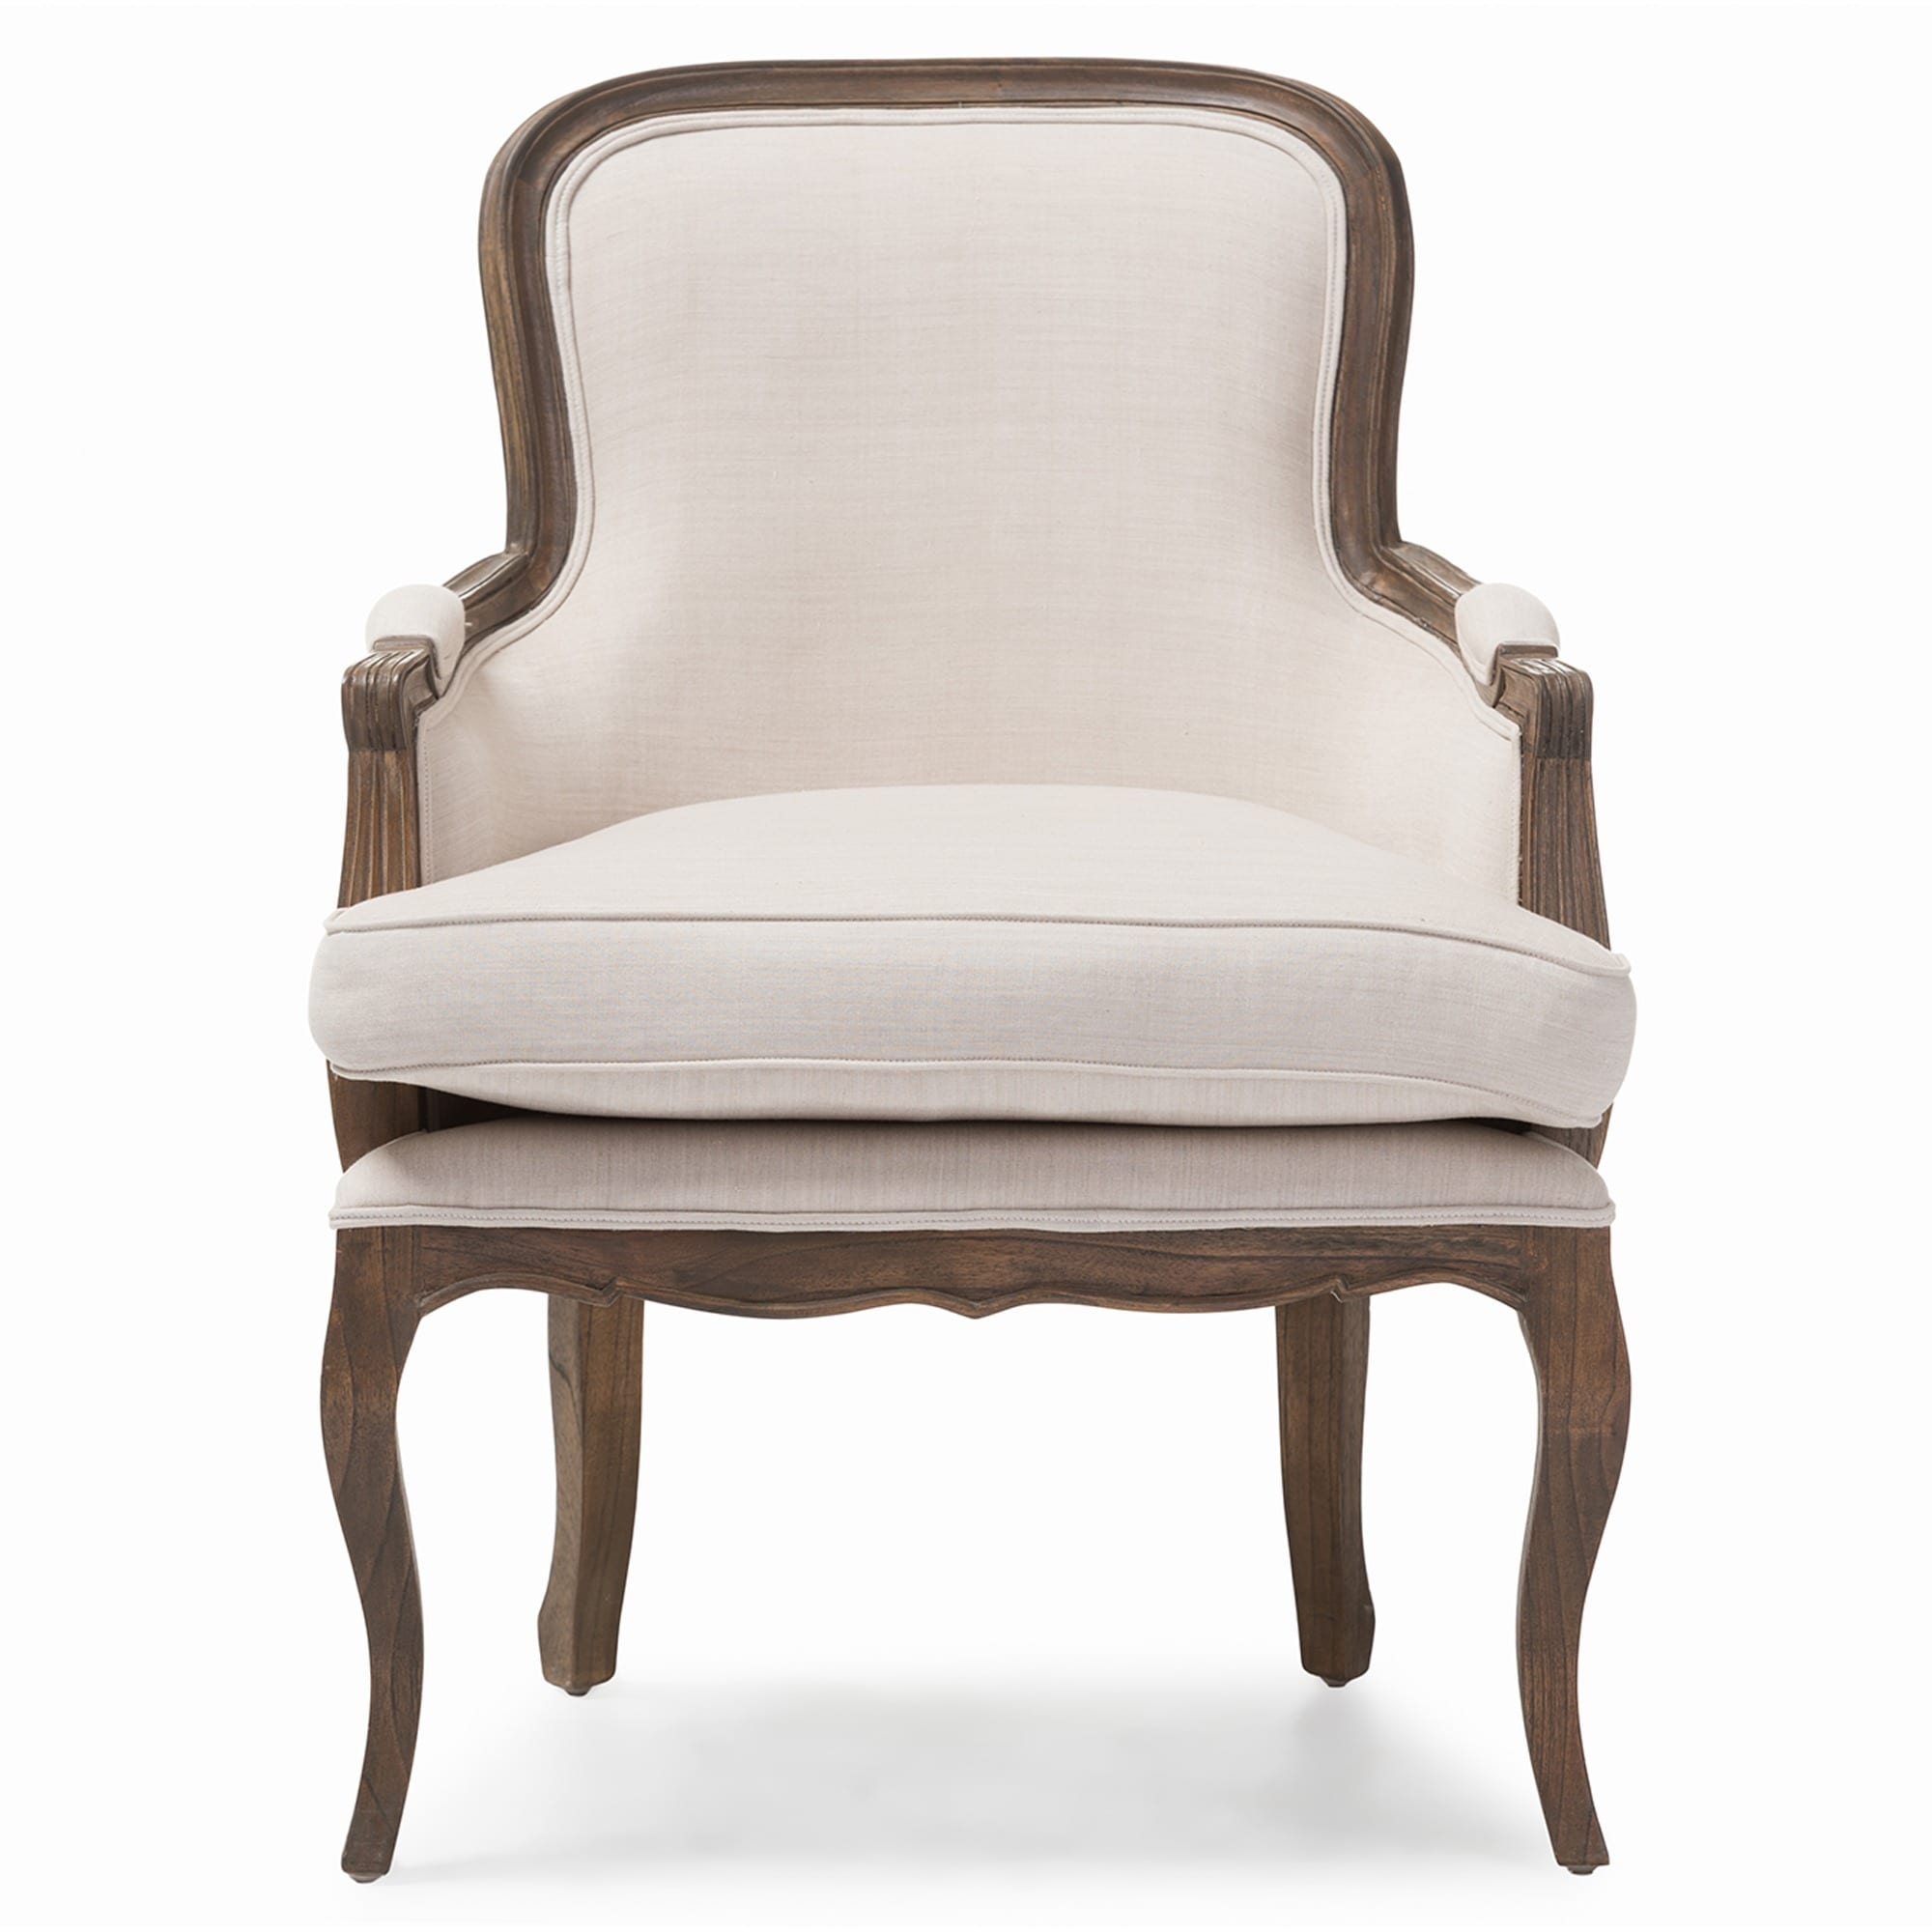 Baxton Studio Napoleon Traditional French Accent Chair In Brown Ash Wood Finish On Sale Overstock 9576726